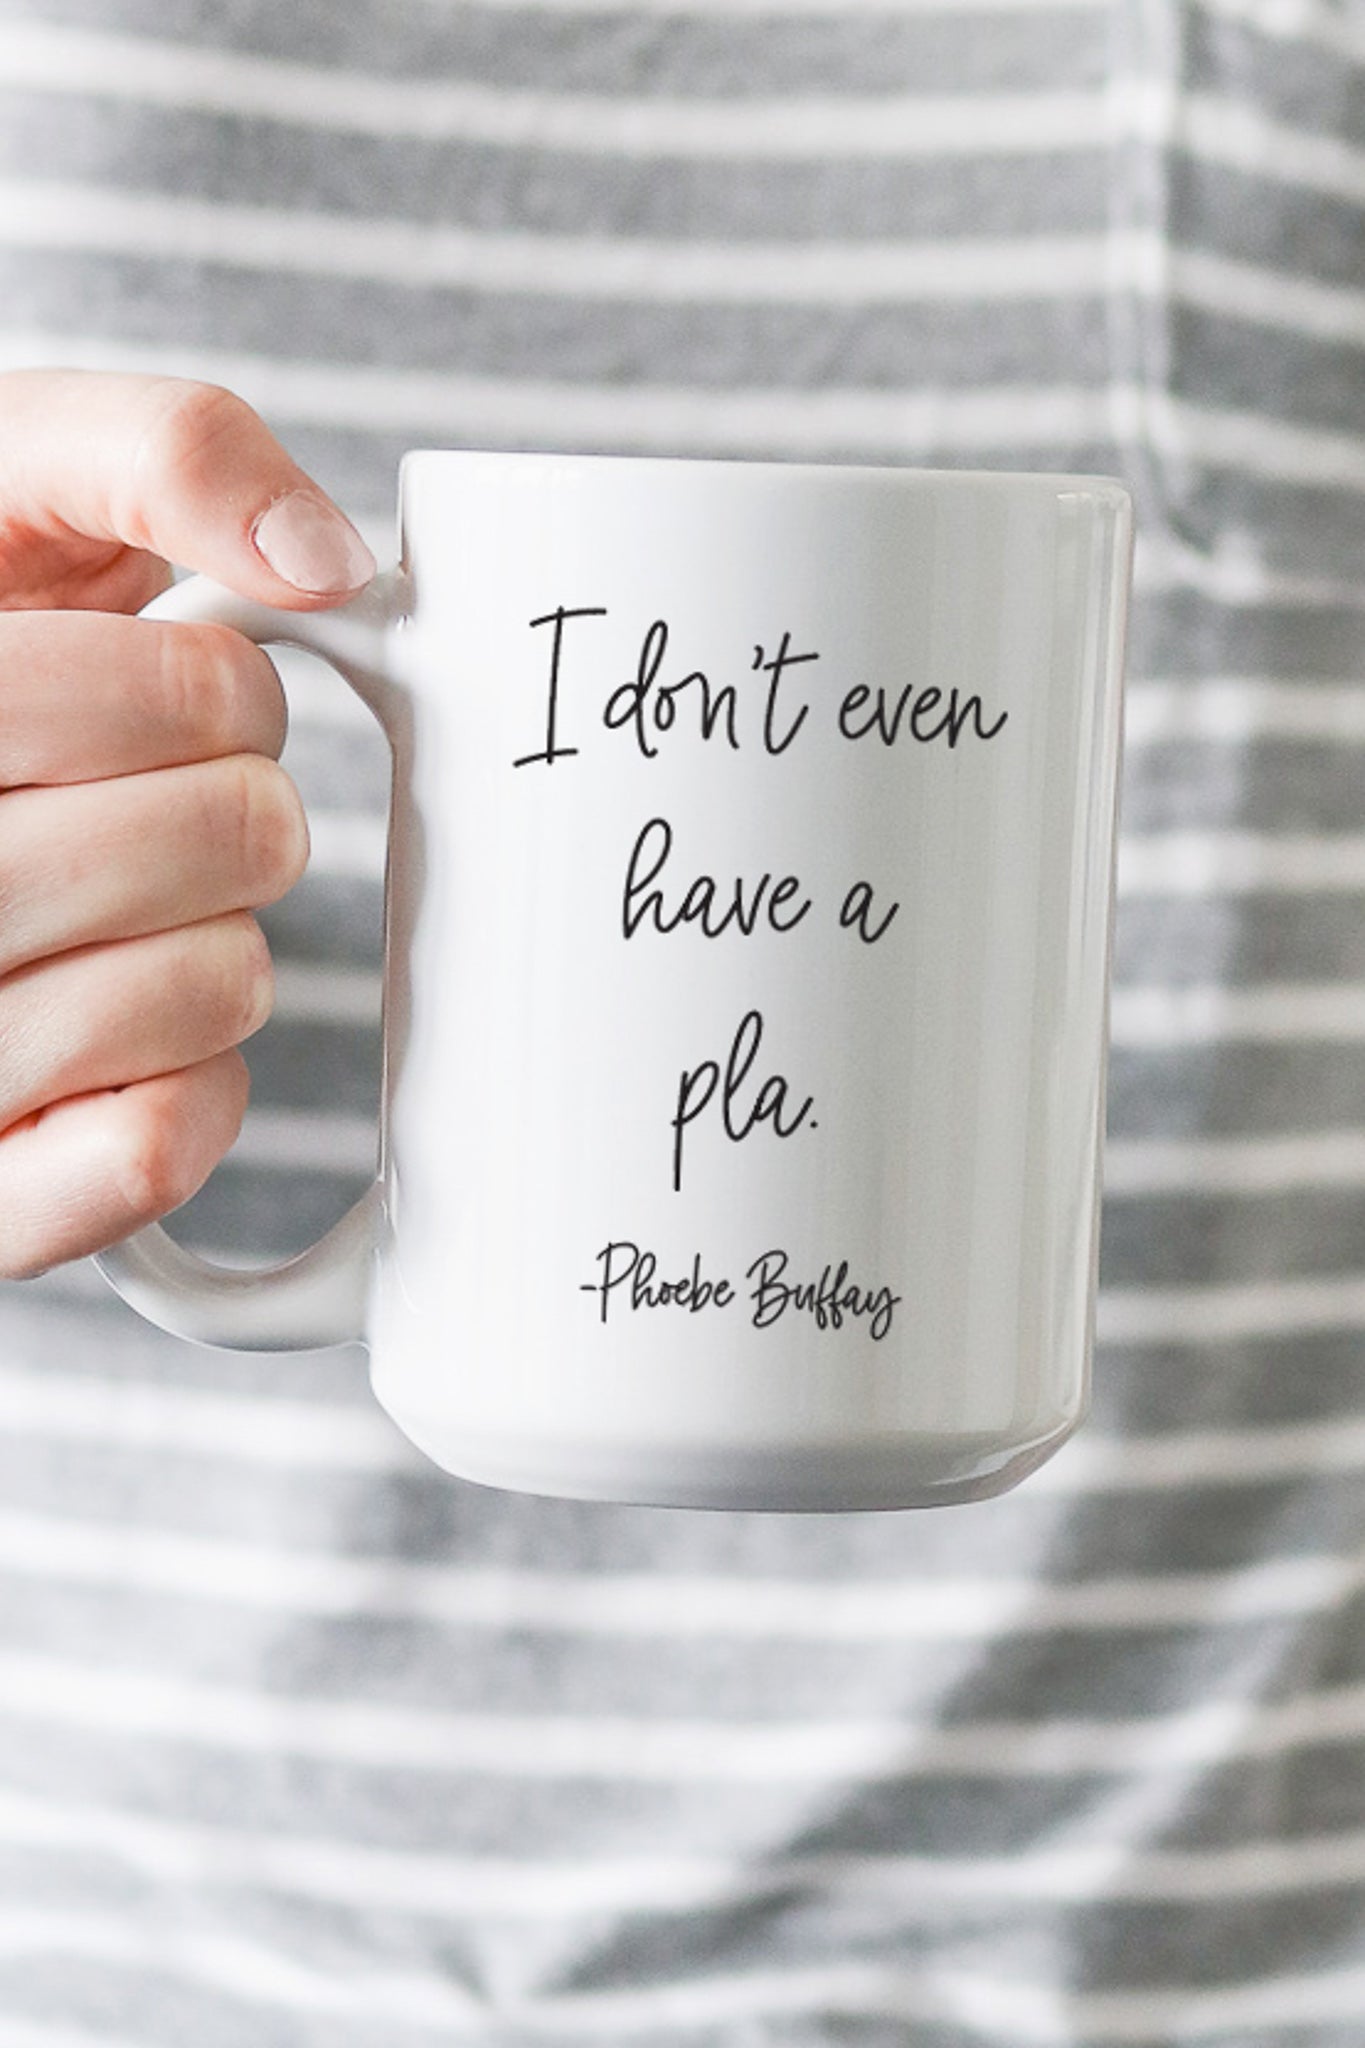 "I don't even have a pla." - Phoebe Buffay  This is the perfect mug for anyone who loves all things Friends! 